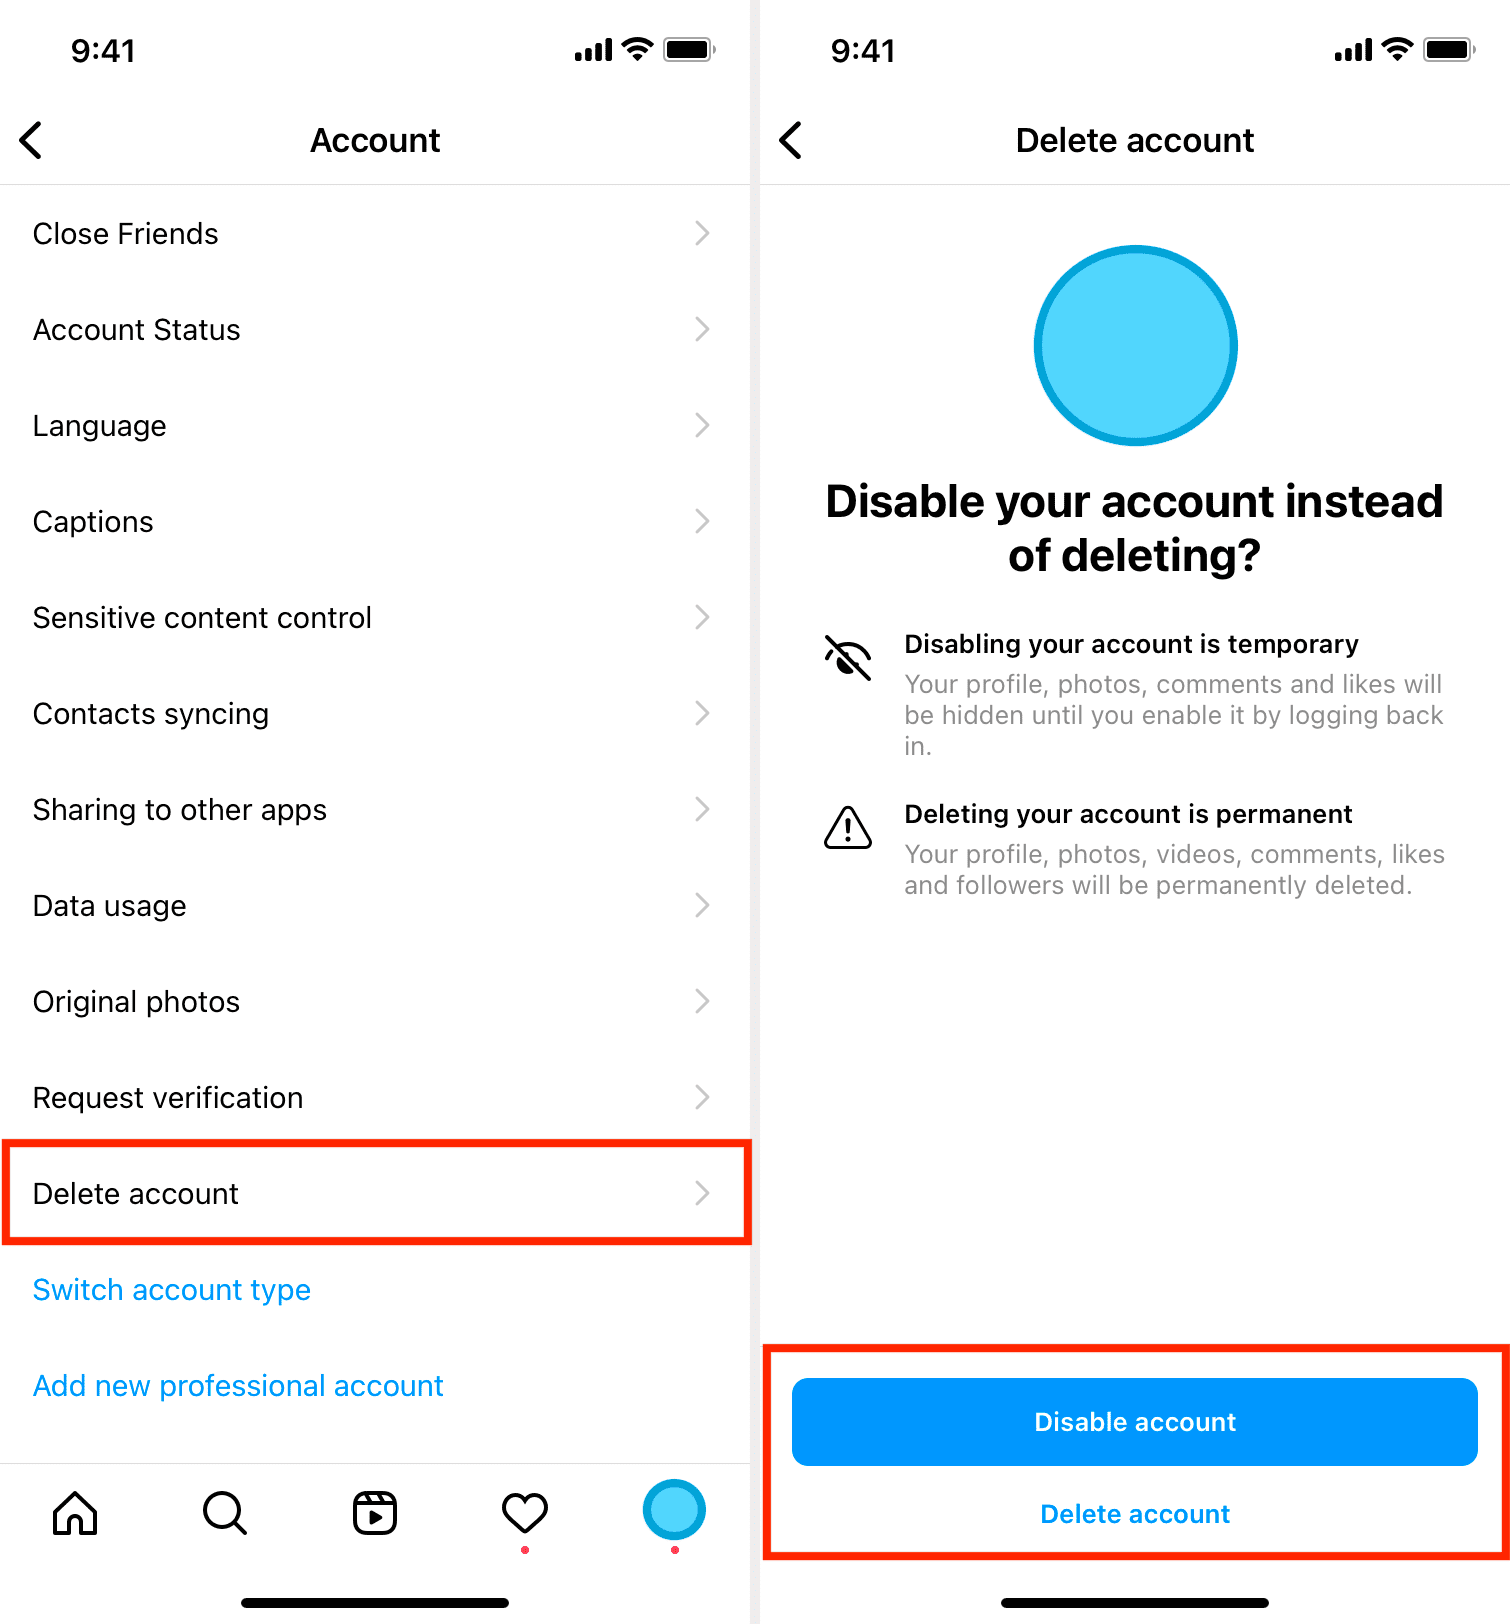 How to delete instagram account on iphone